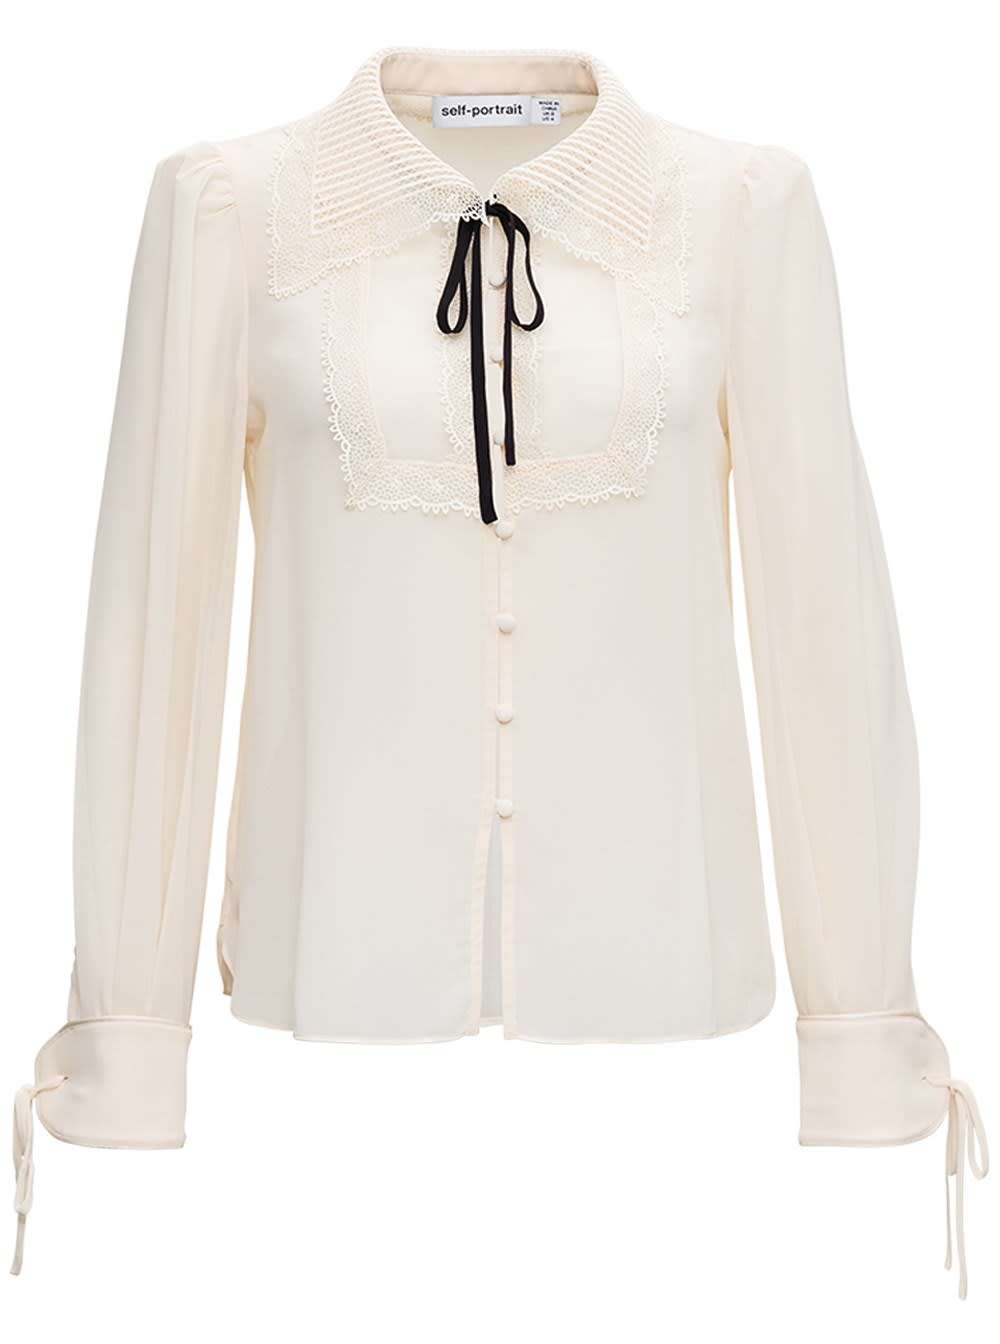 Self-portrait Ivory Colored Shirt With Lace Inserts